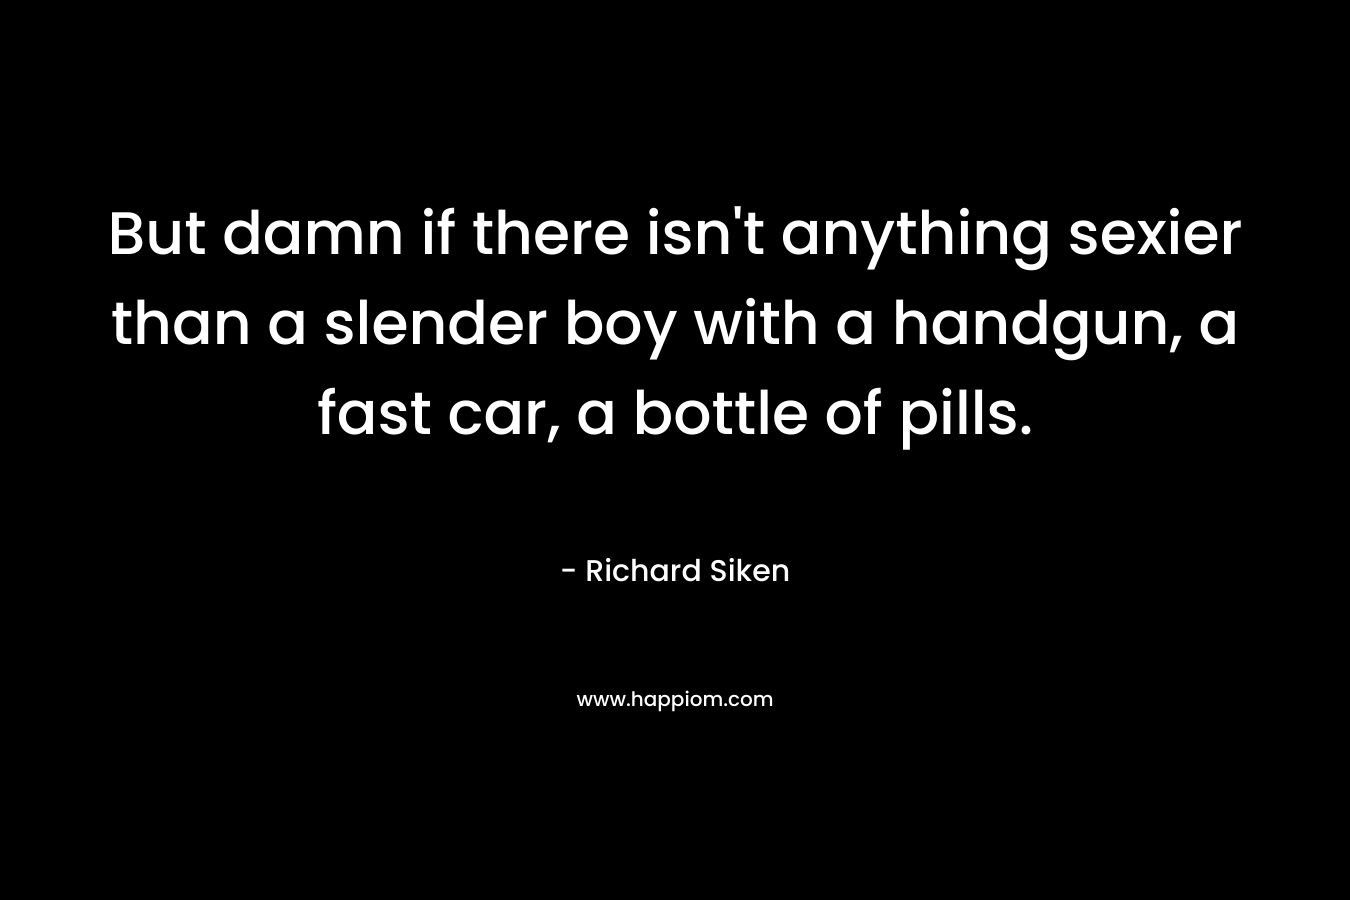 But damn if there isn't anything sexier than a slender boy with a handgun, a fast car, a bottle of pills.